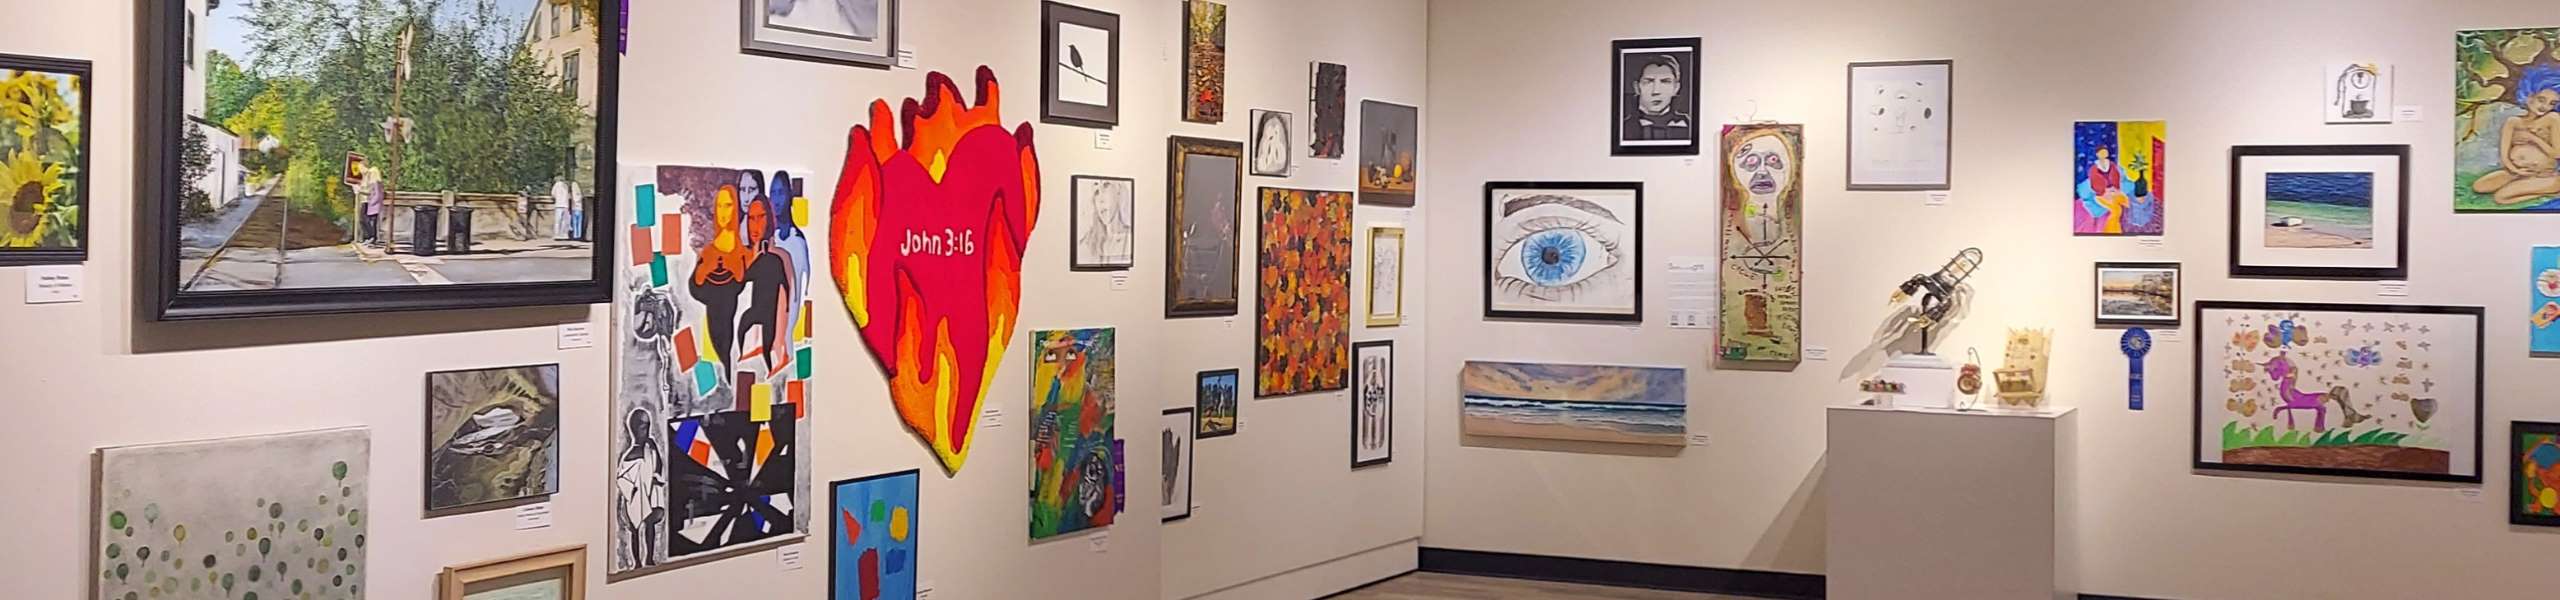 Delaware State Employee Art Exhibition on view